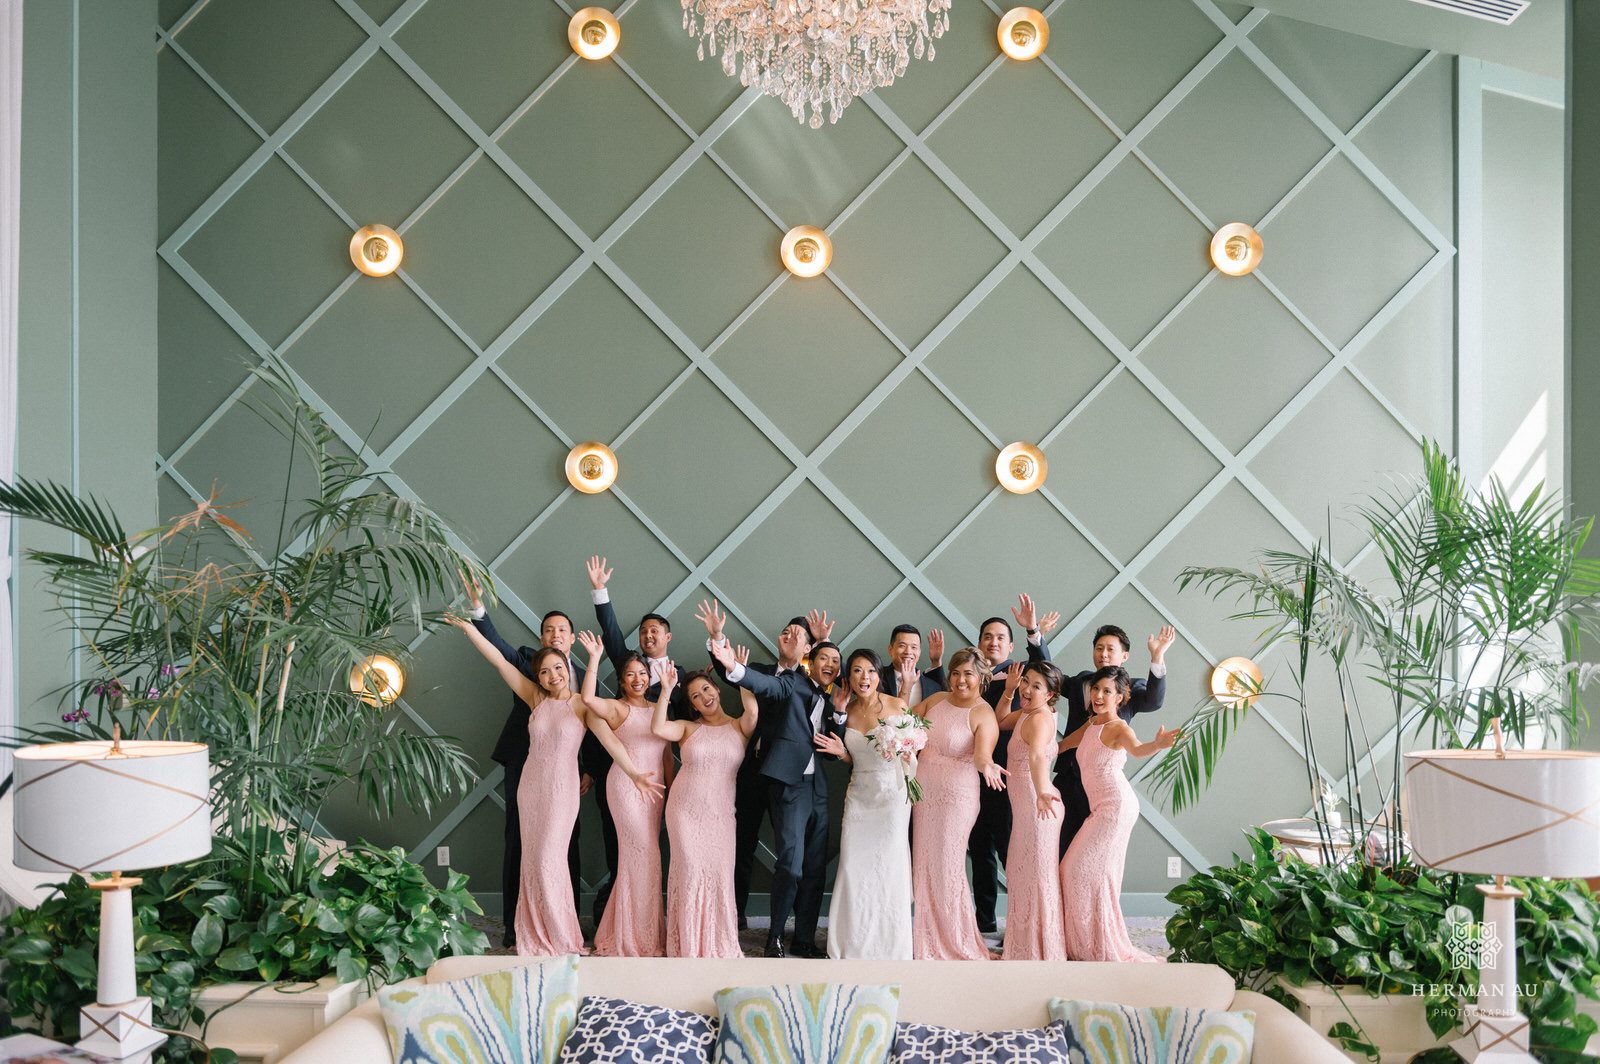 The entire bridal party striking a goofy pose